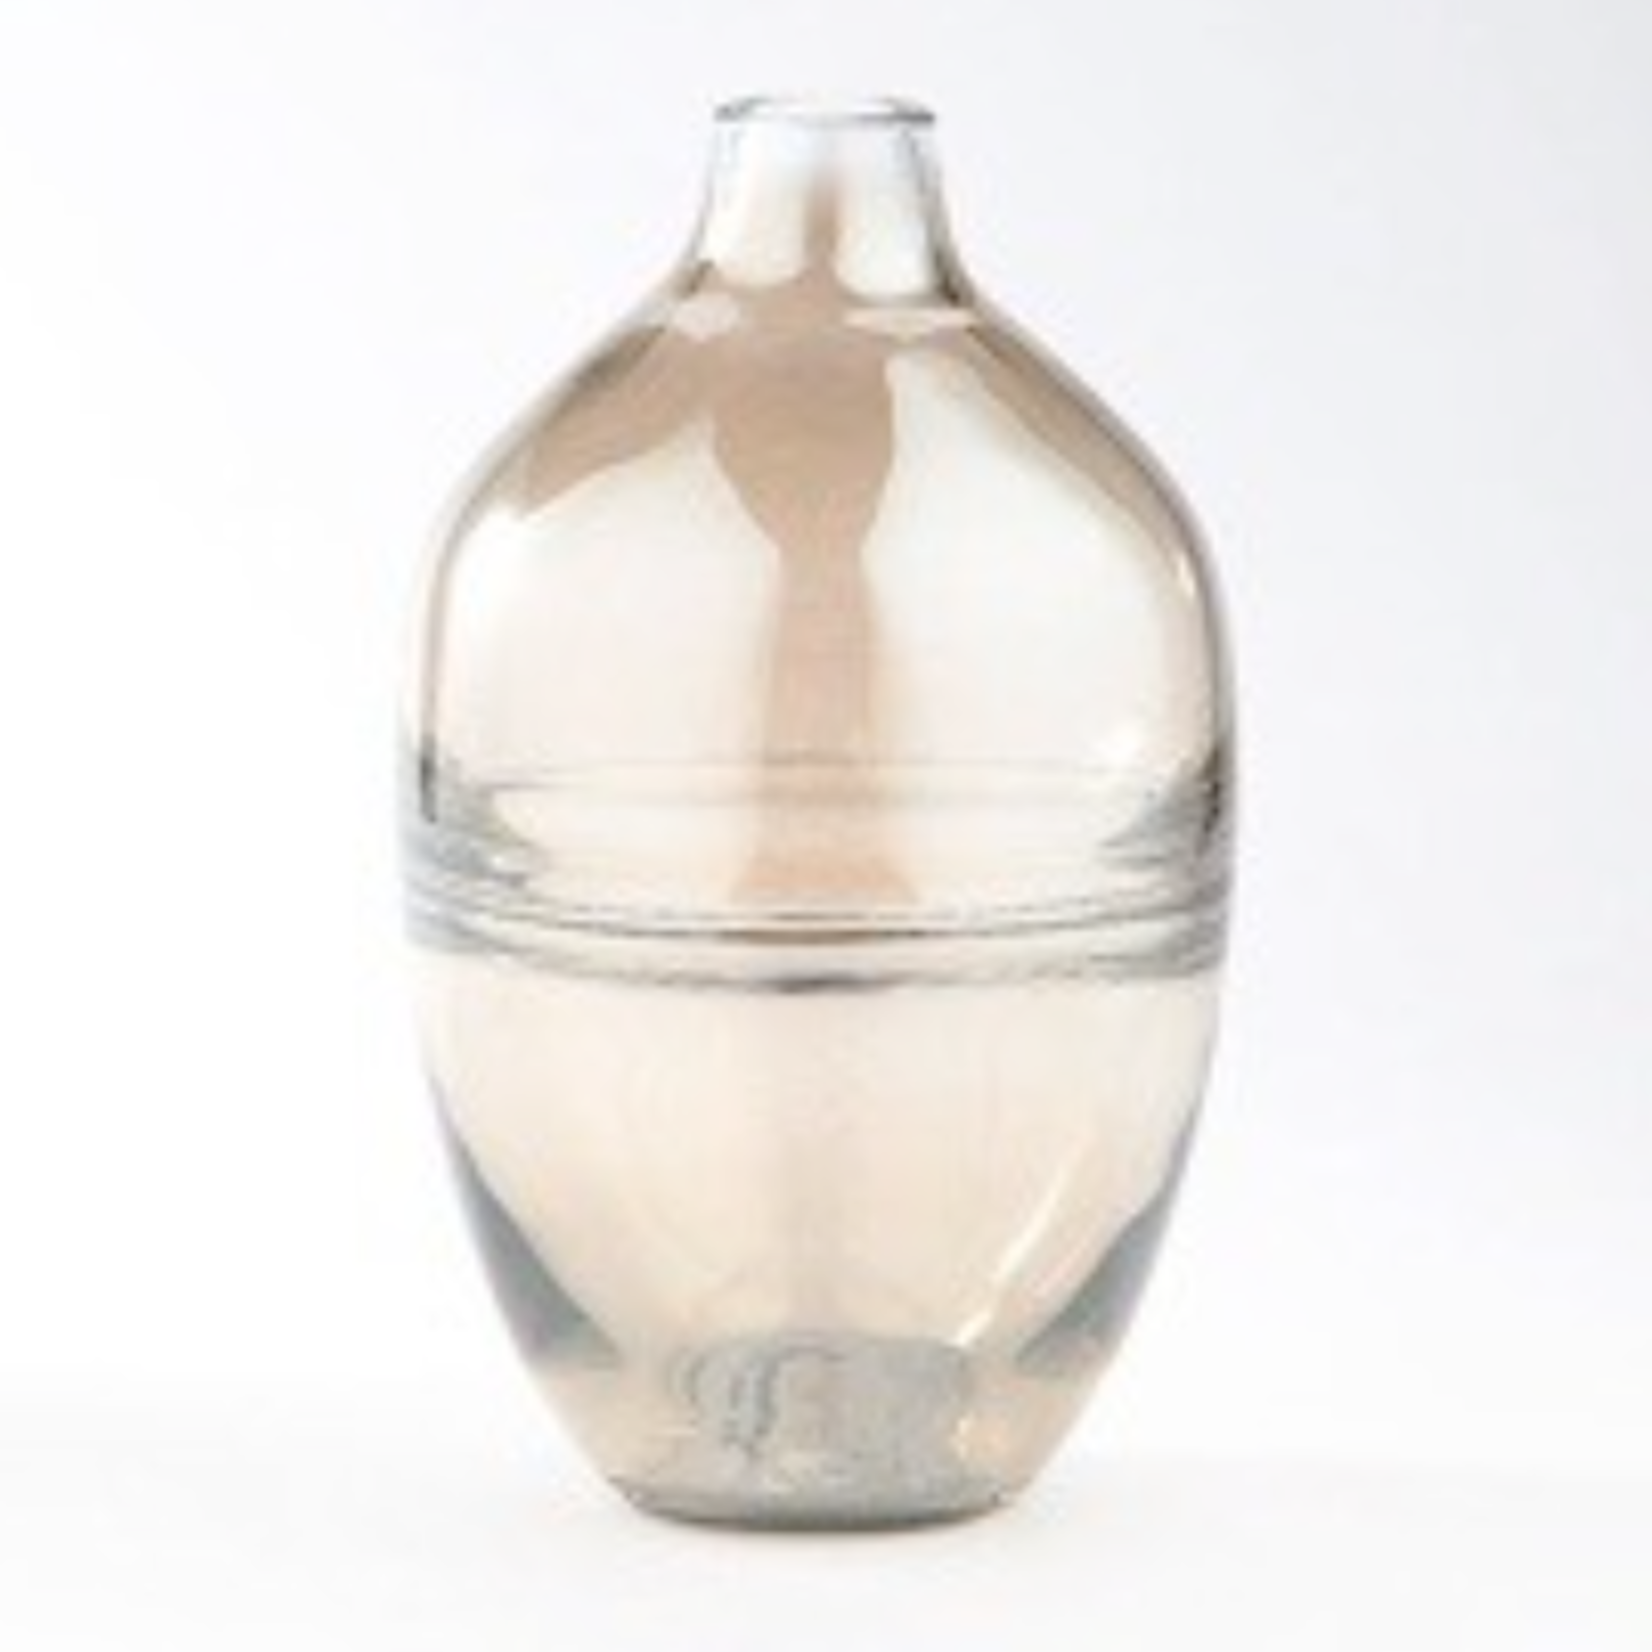 60% off was $25 now $10.00. 10”H X 6” GRAY GLASS BUD VASE